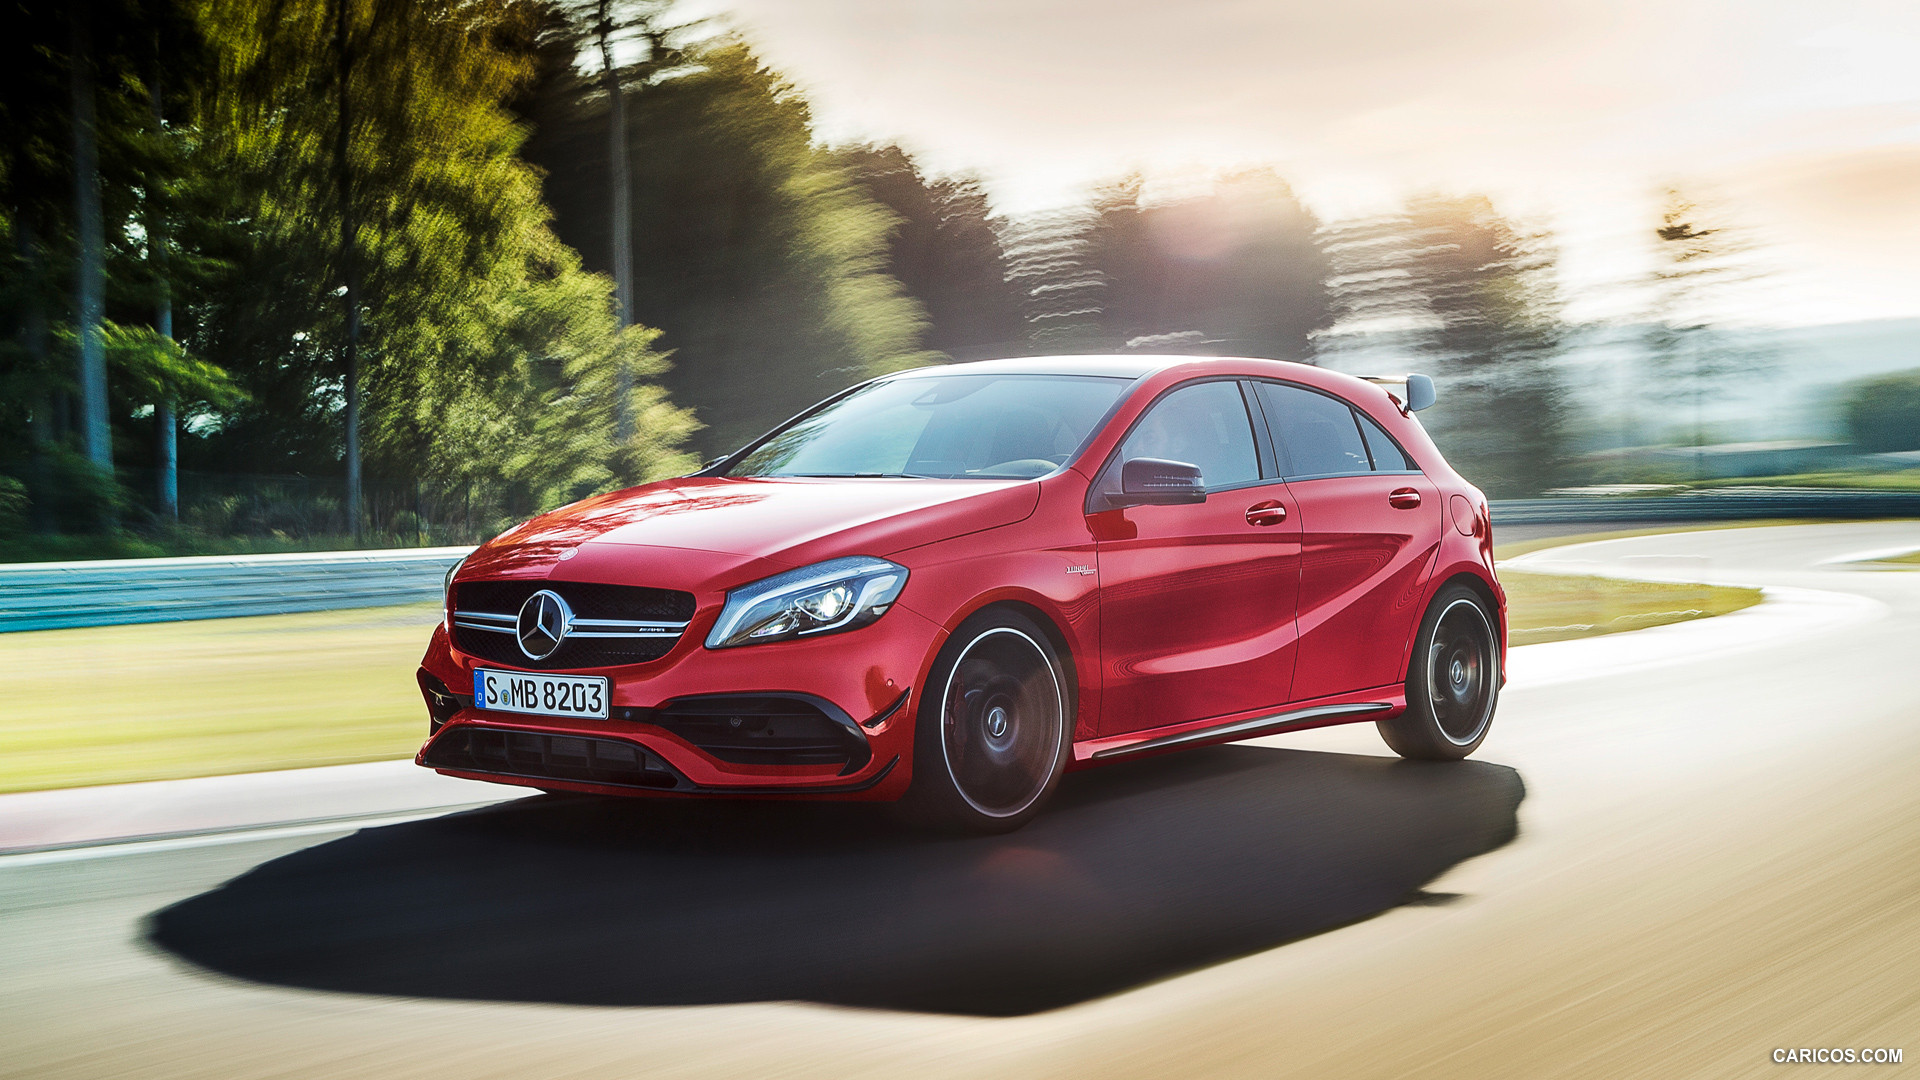 2016 Mercedes-AMG A45 AMG Exclusive (Jupiter Red) - Front, #15 of 15